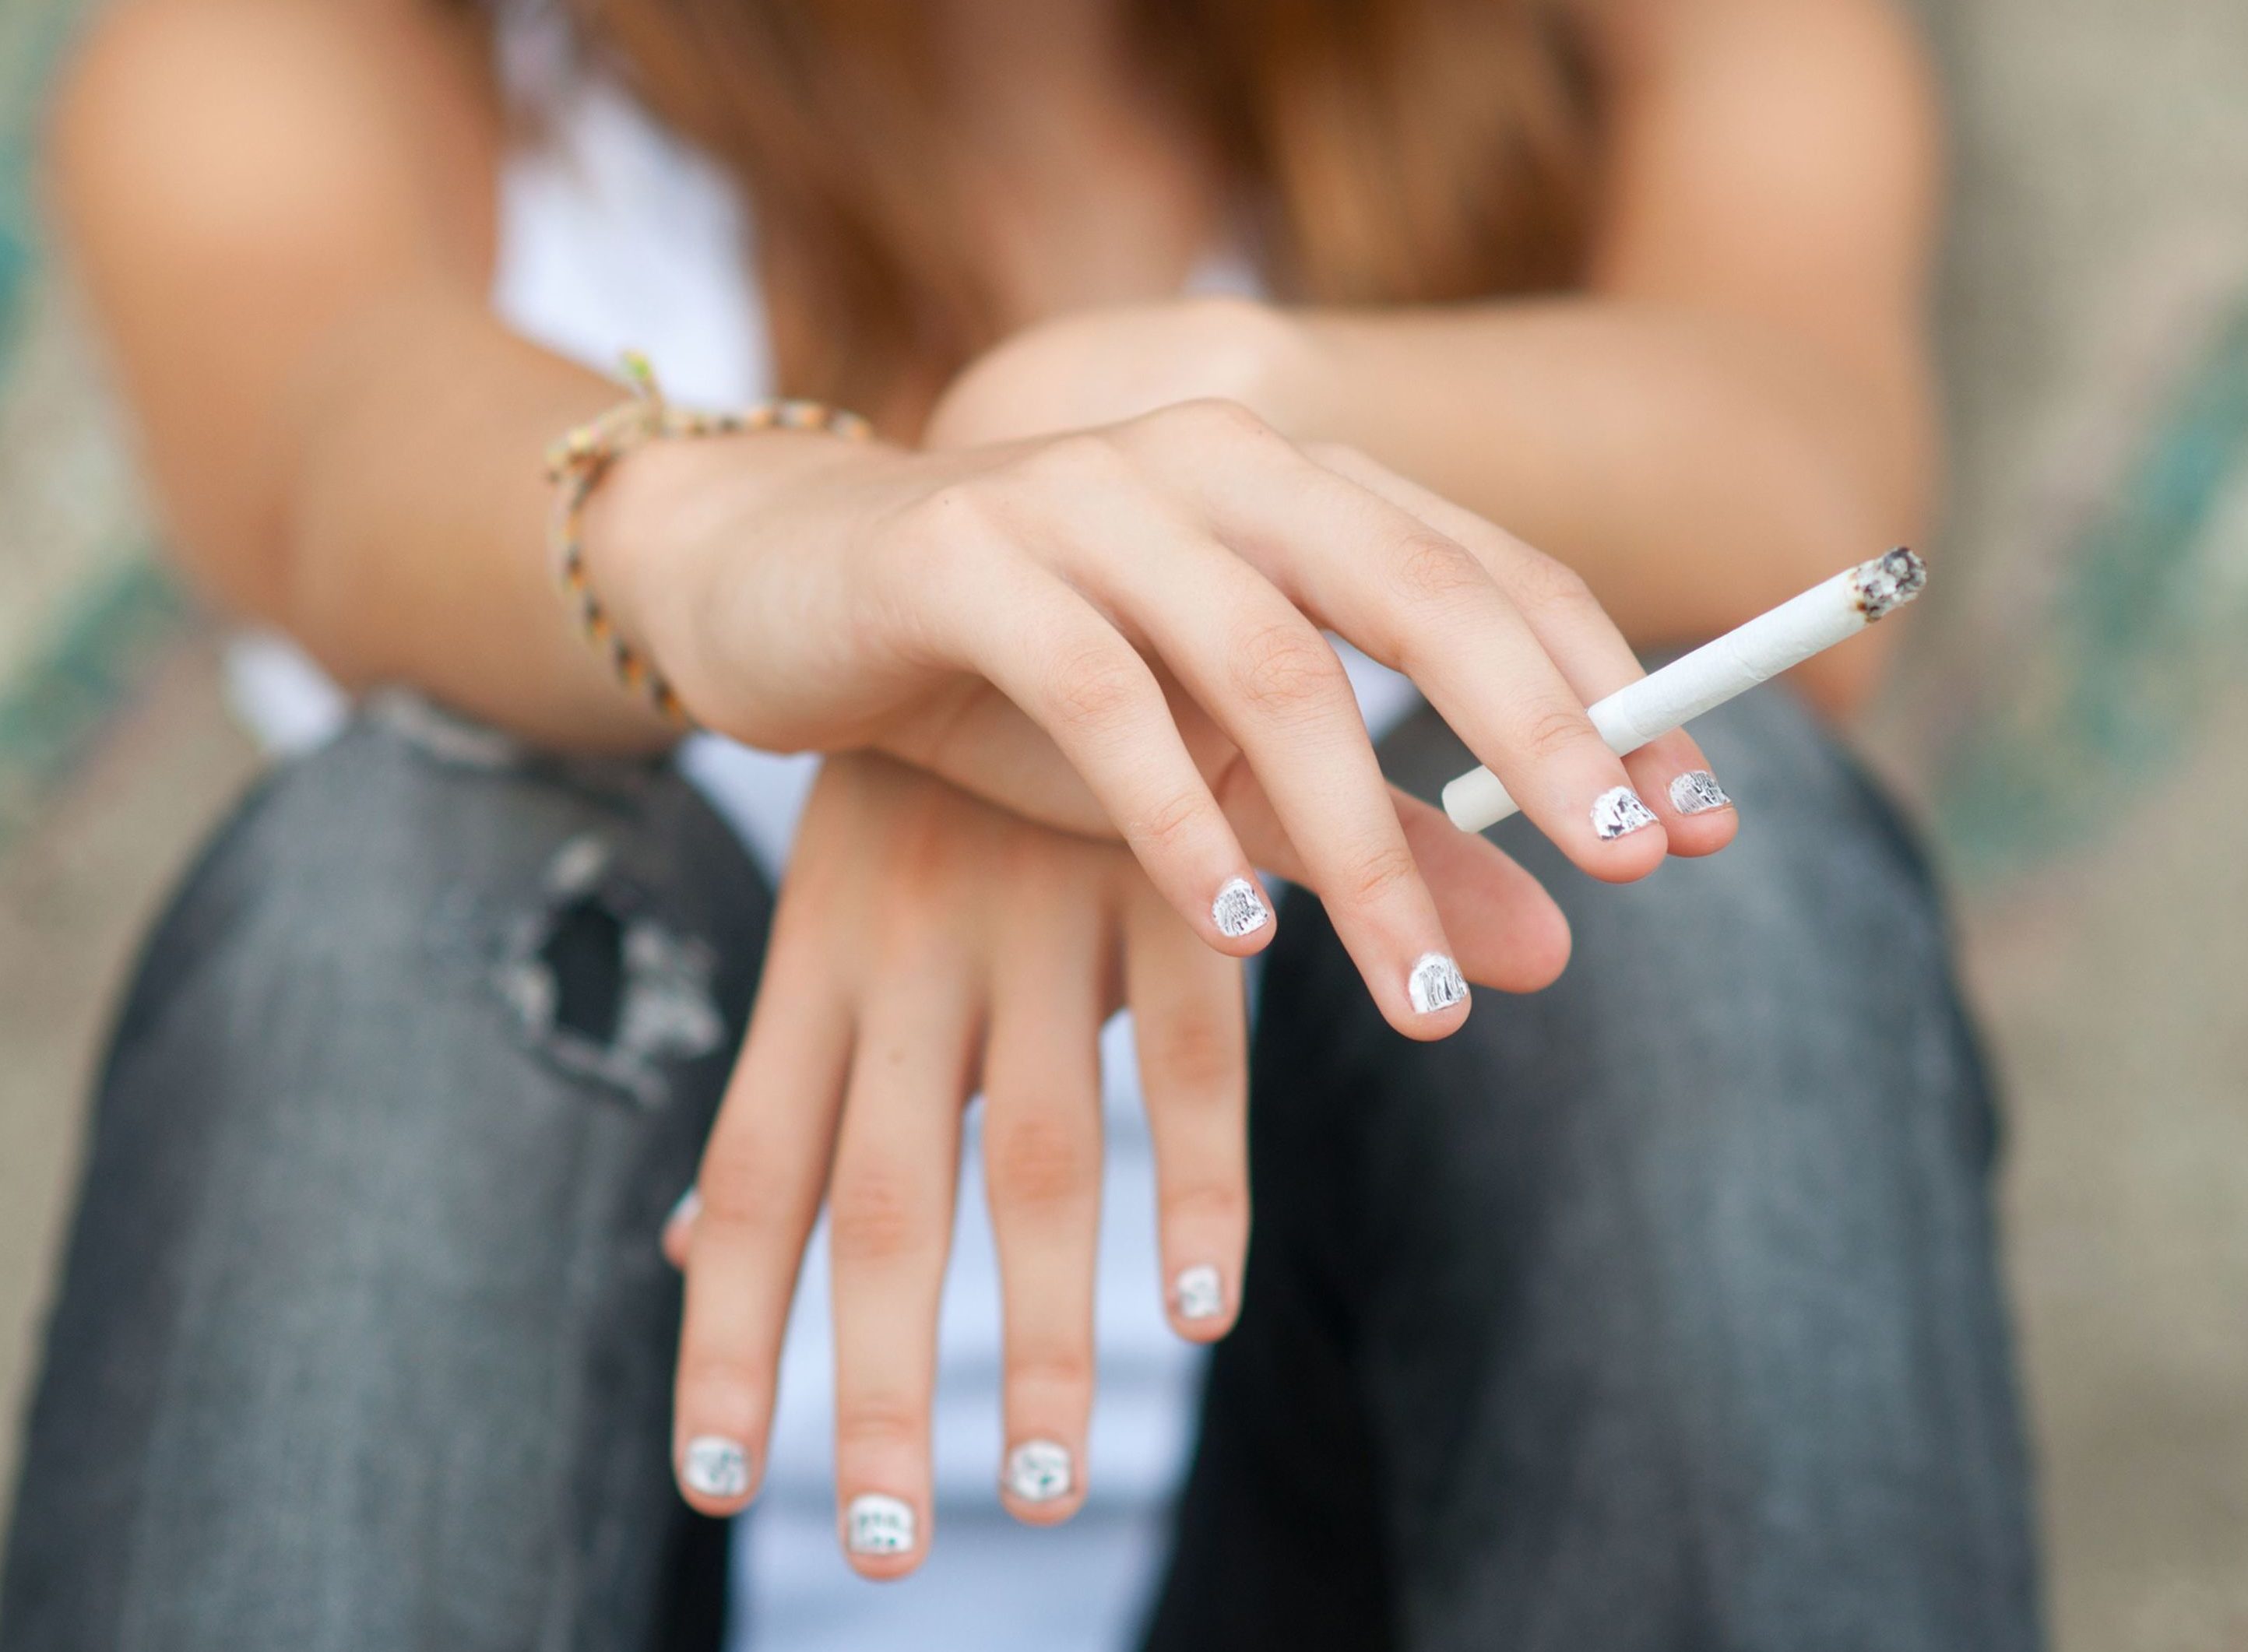 Dundee has the second worst smoking figures for pregnant women in Scotland.